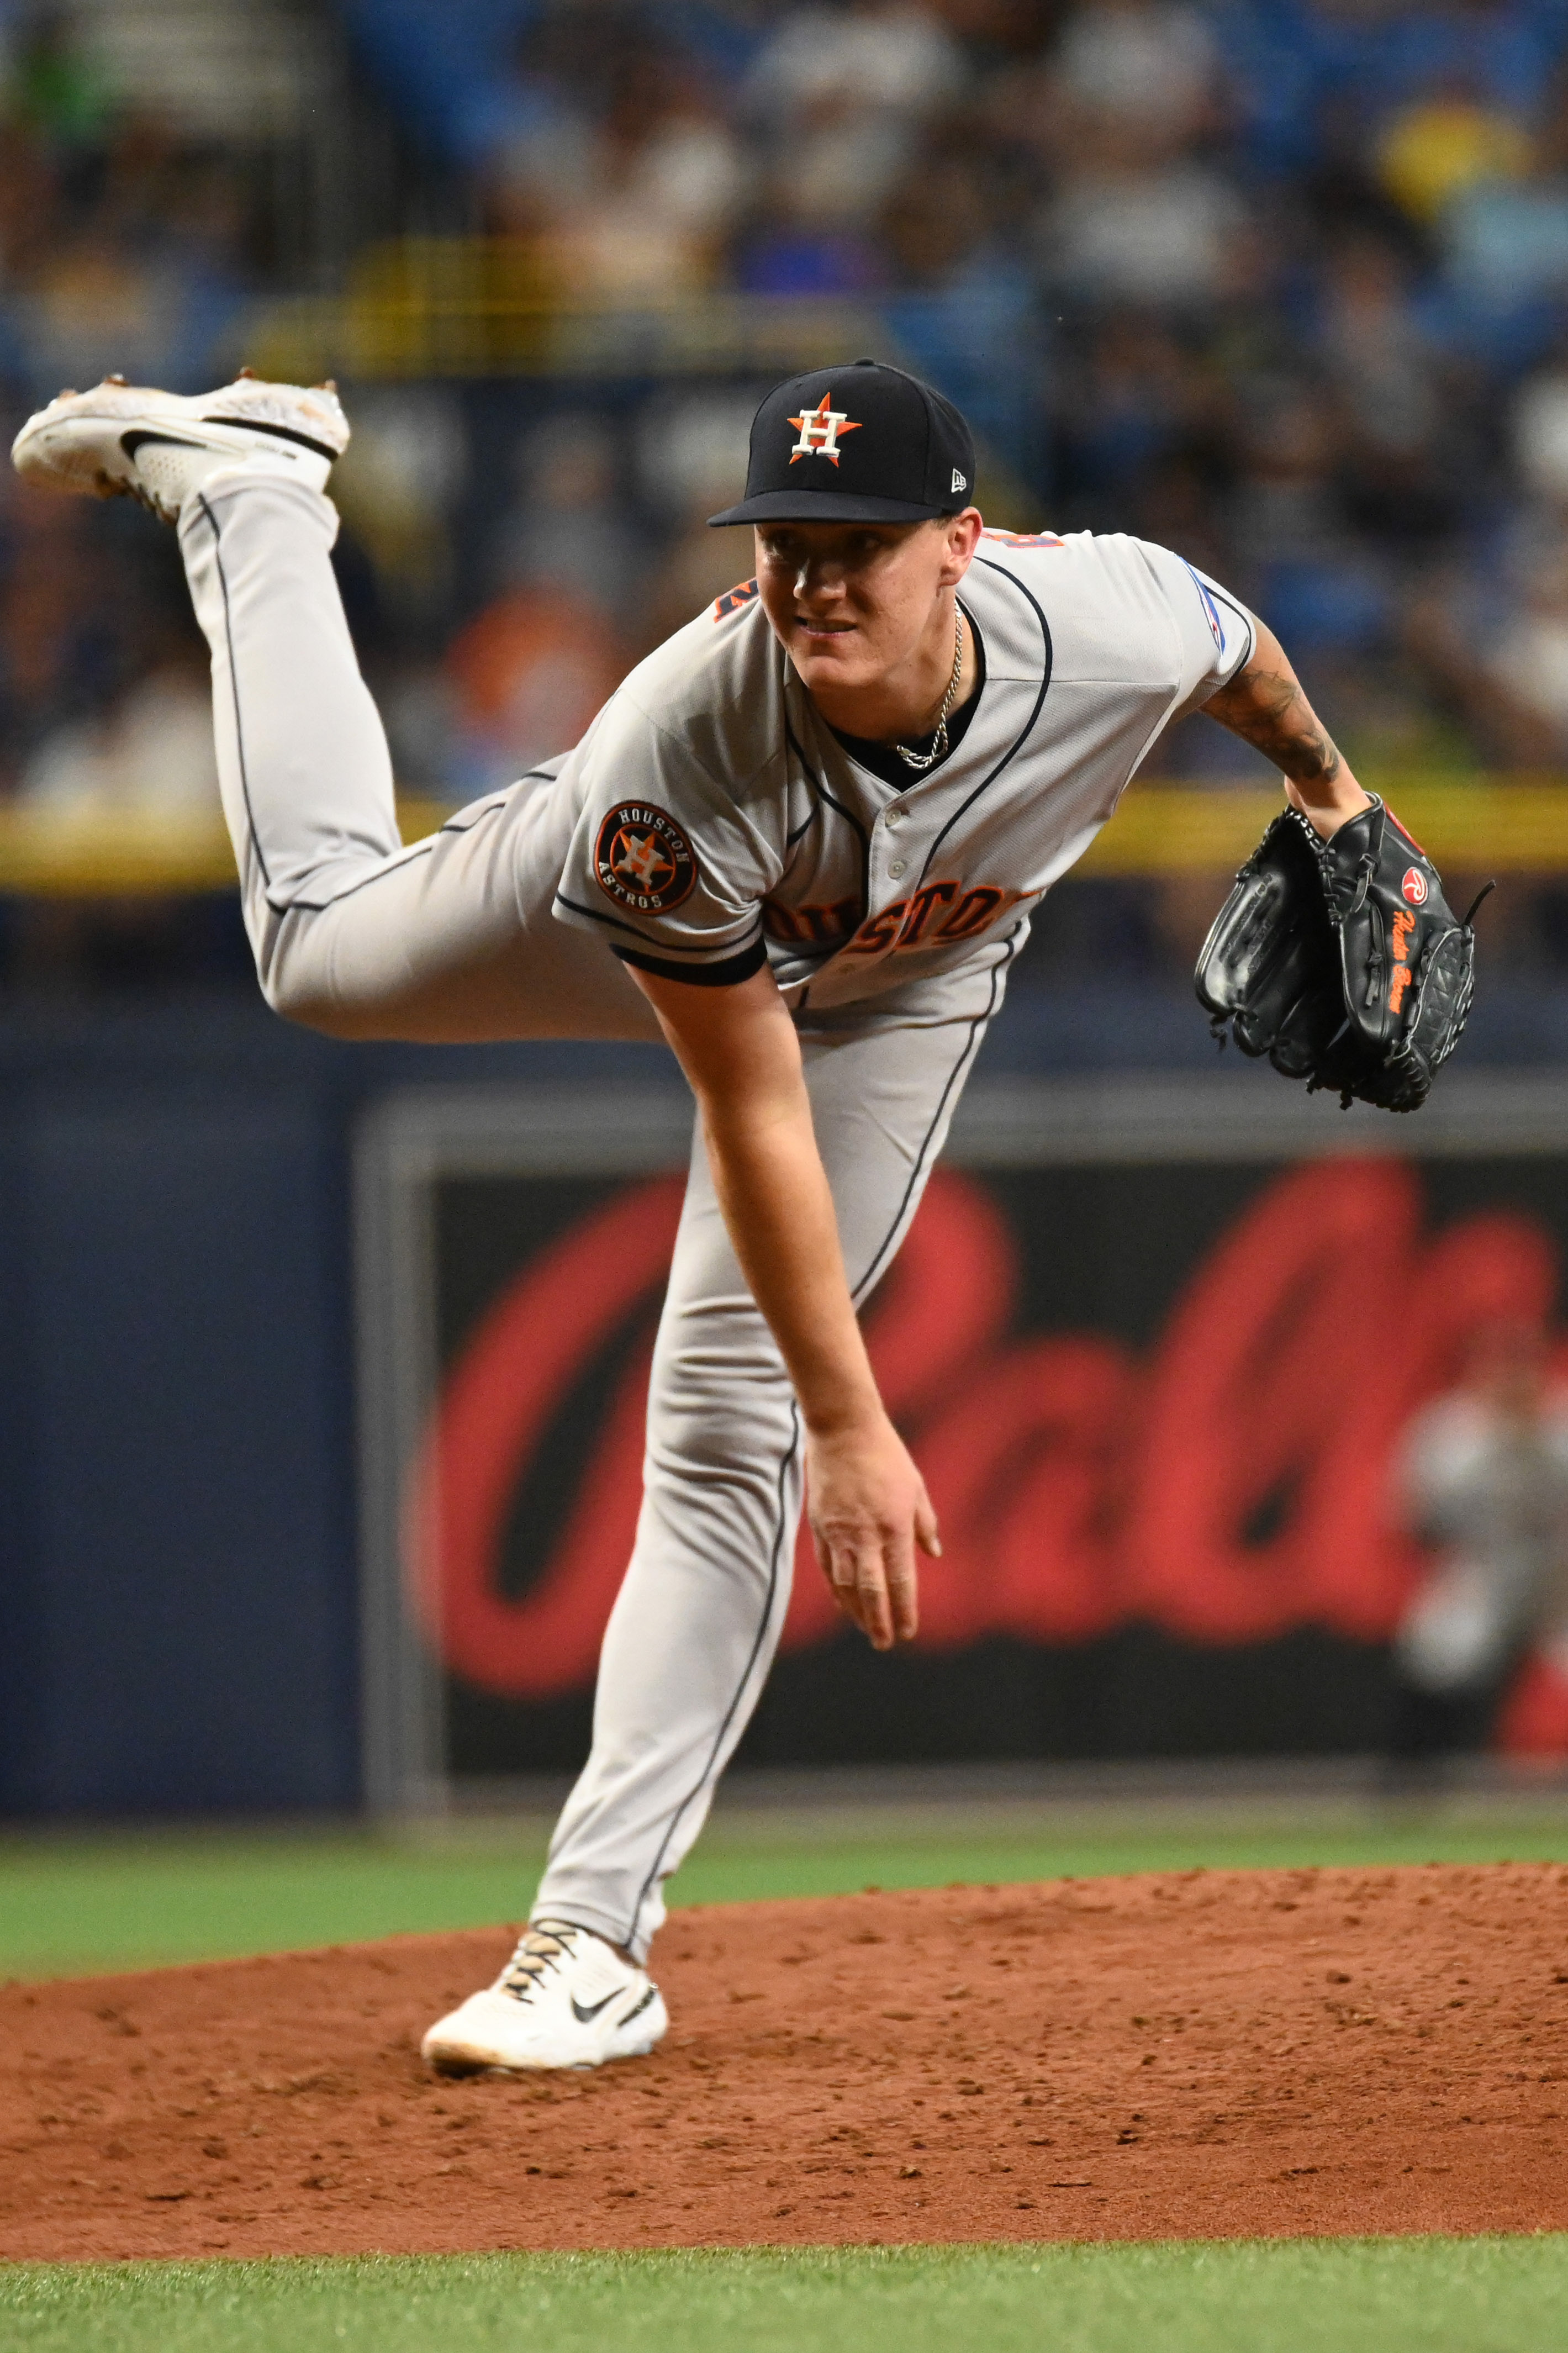 Luis Garcia exits early, but Astros still handle Giants